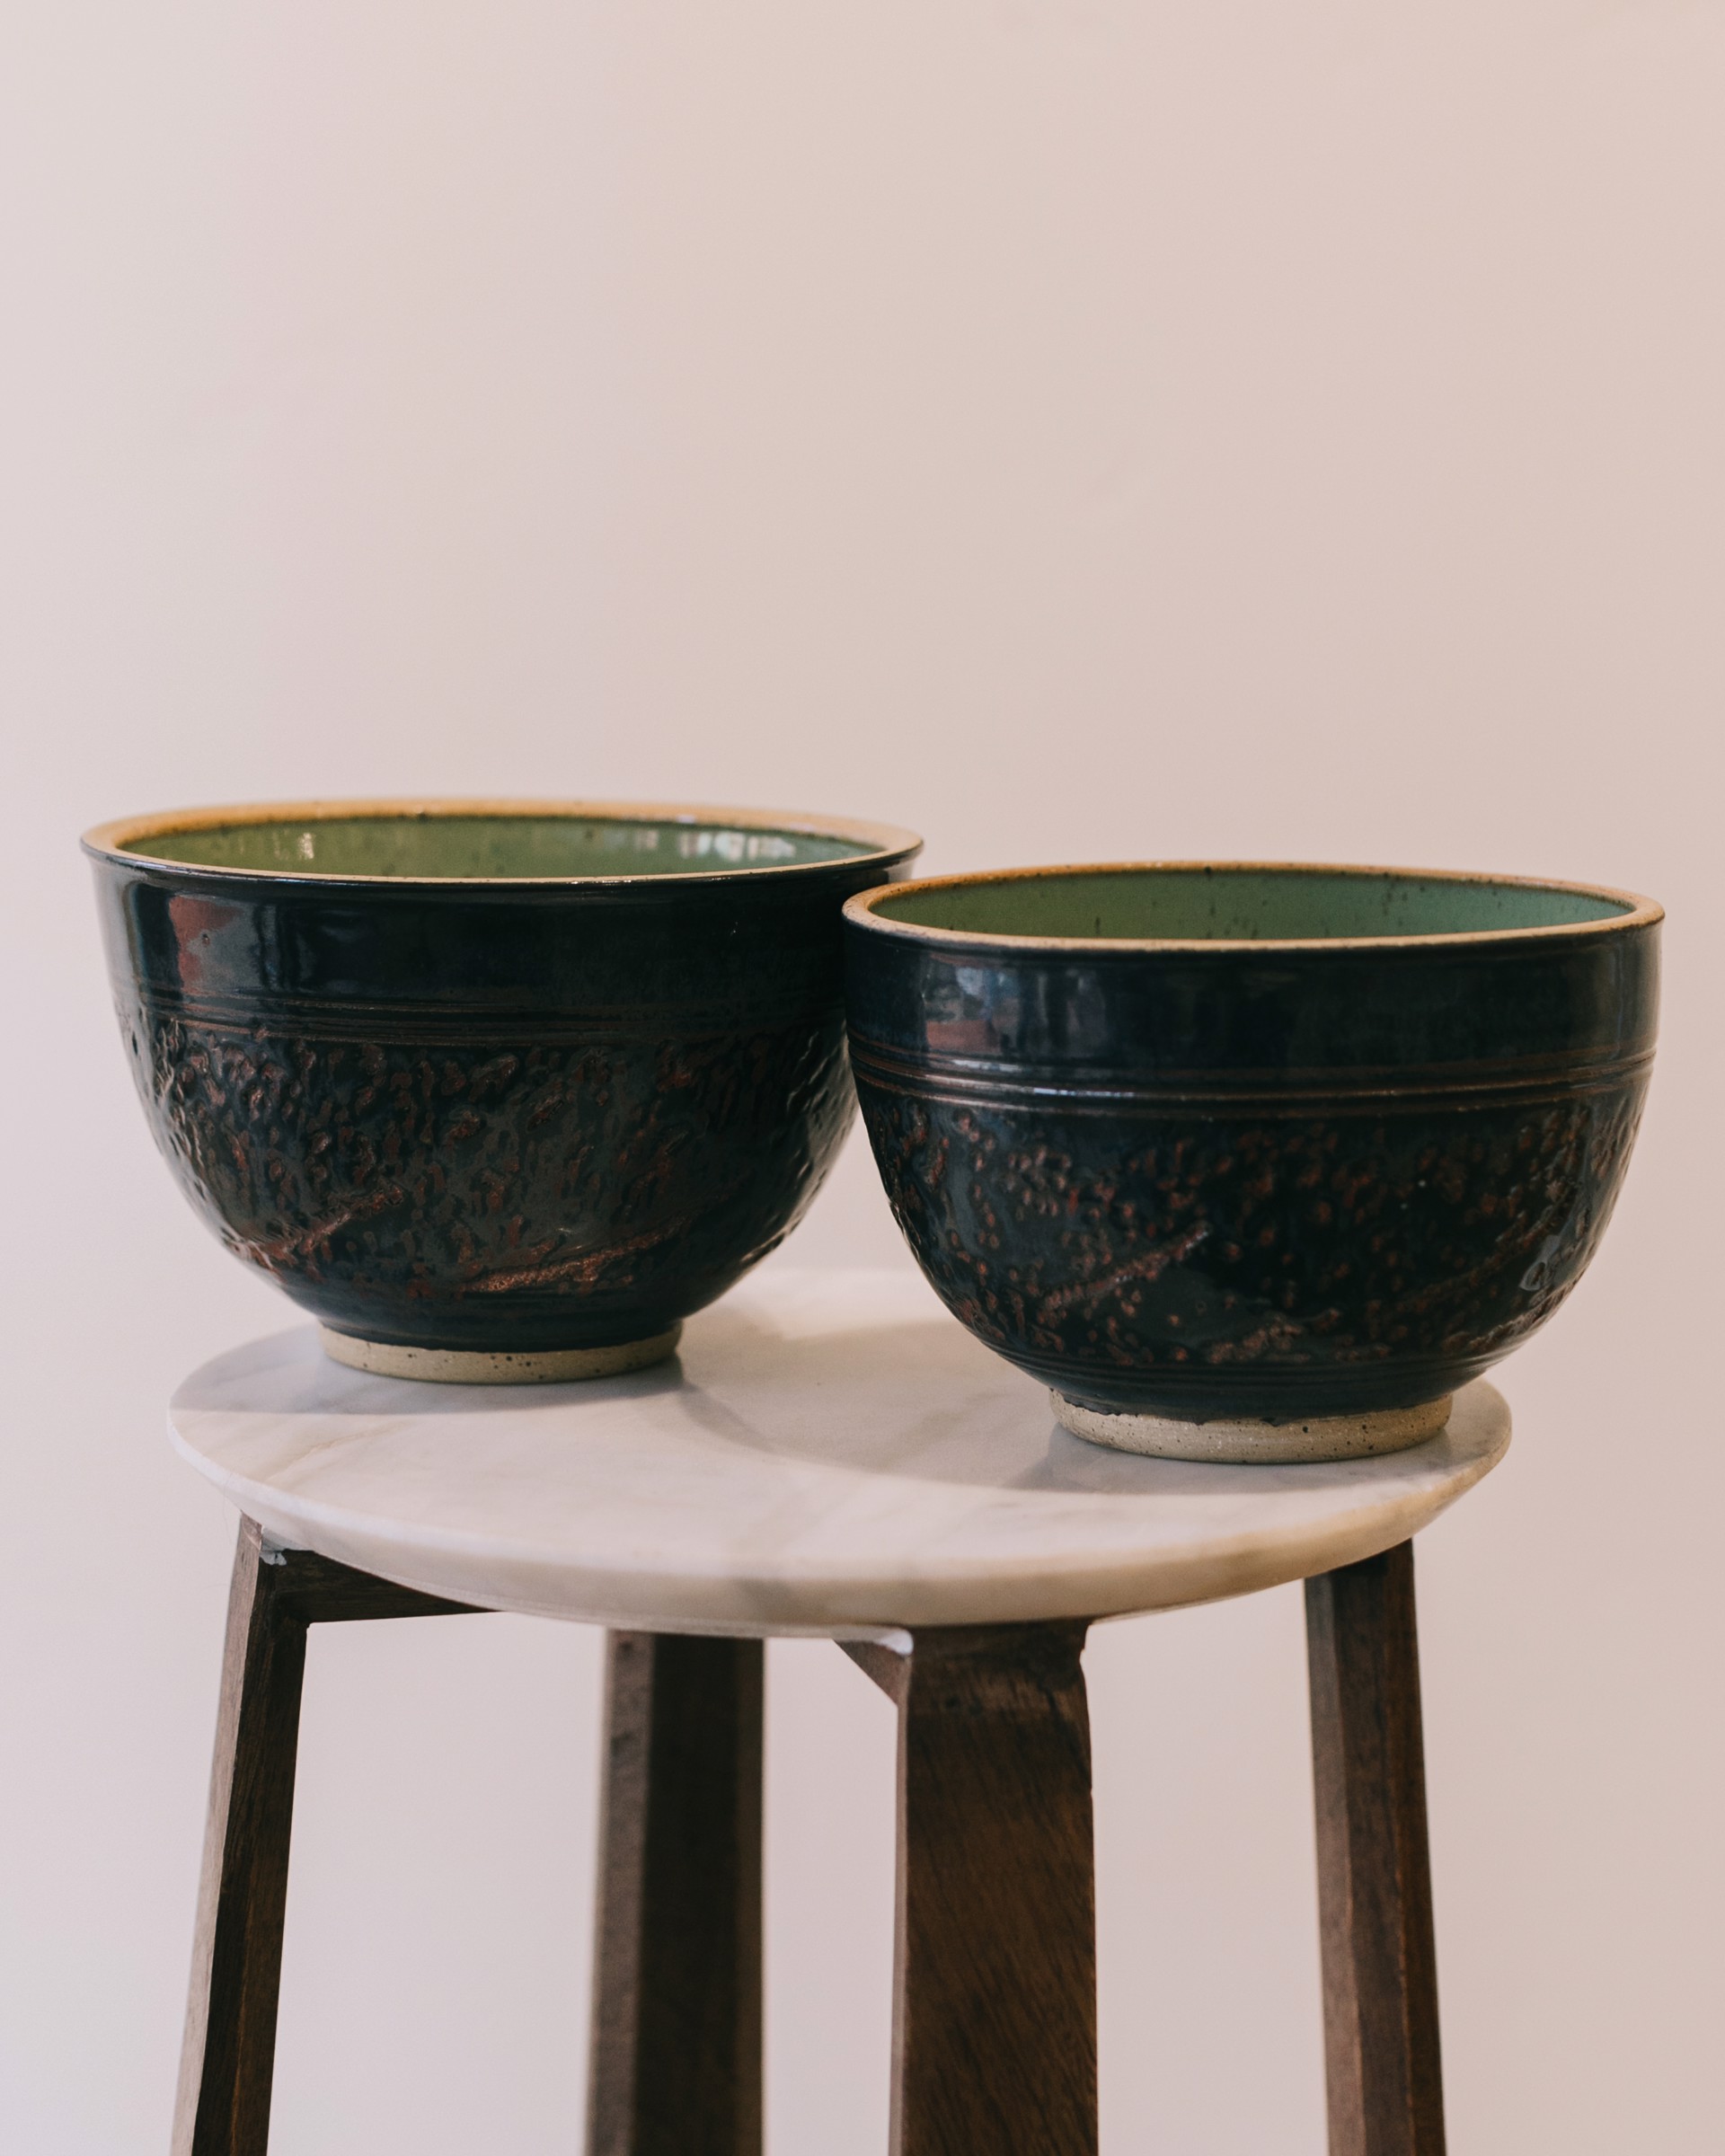 His/Hers Bowls 061 by Buck Dollarhide